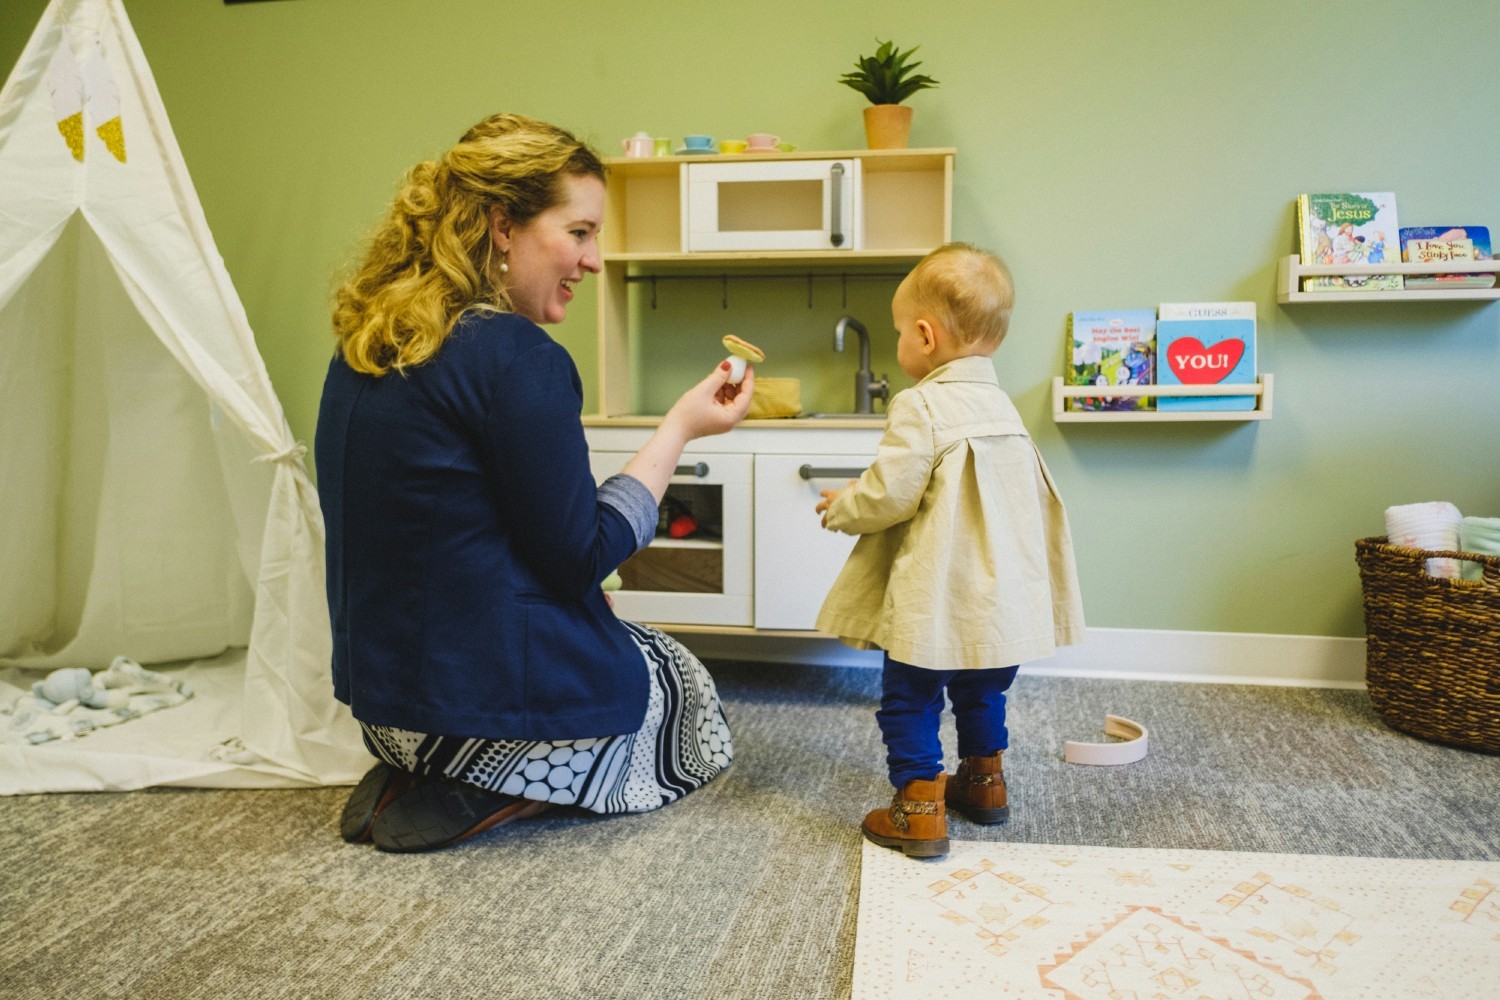 Ascension fosters a healthy work-life balance by providing spaces where employees can bring their kids to the office.